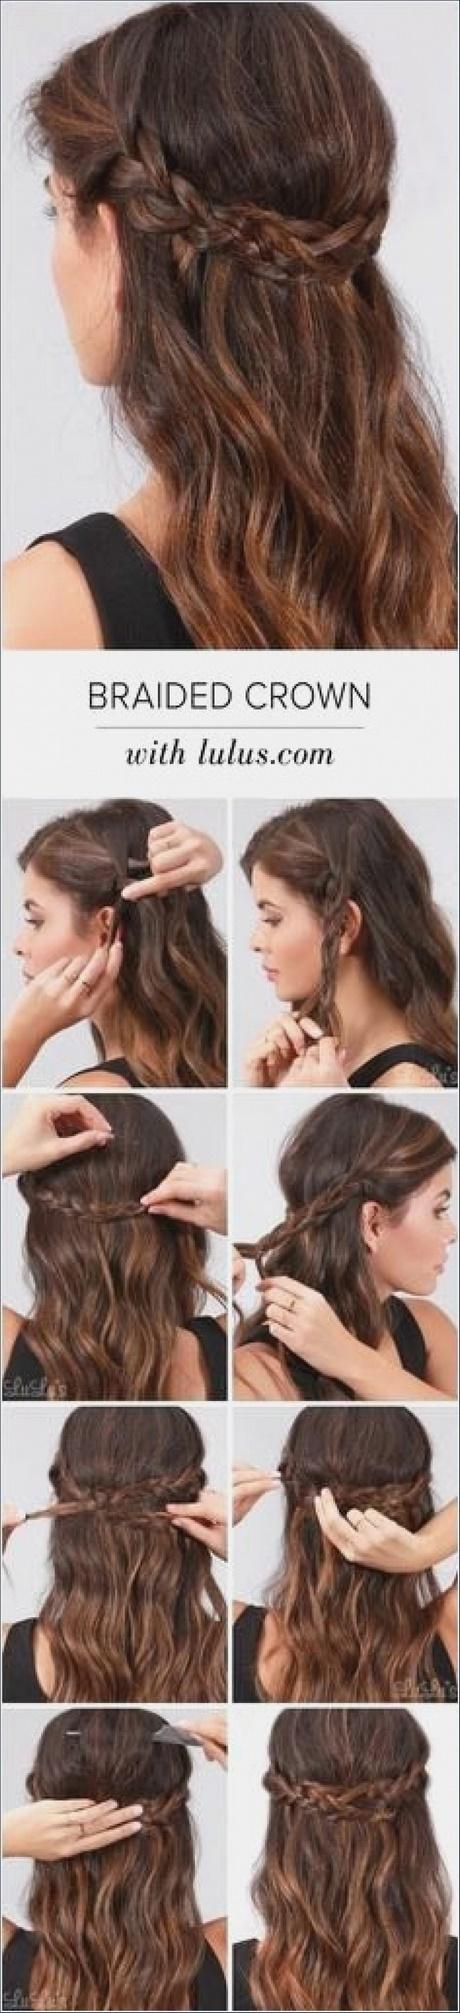 Very easy hairstyles to do at home very-easy-hairstyles-to-do-at-home-79_5